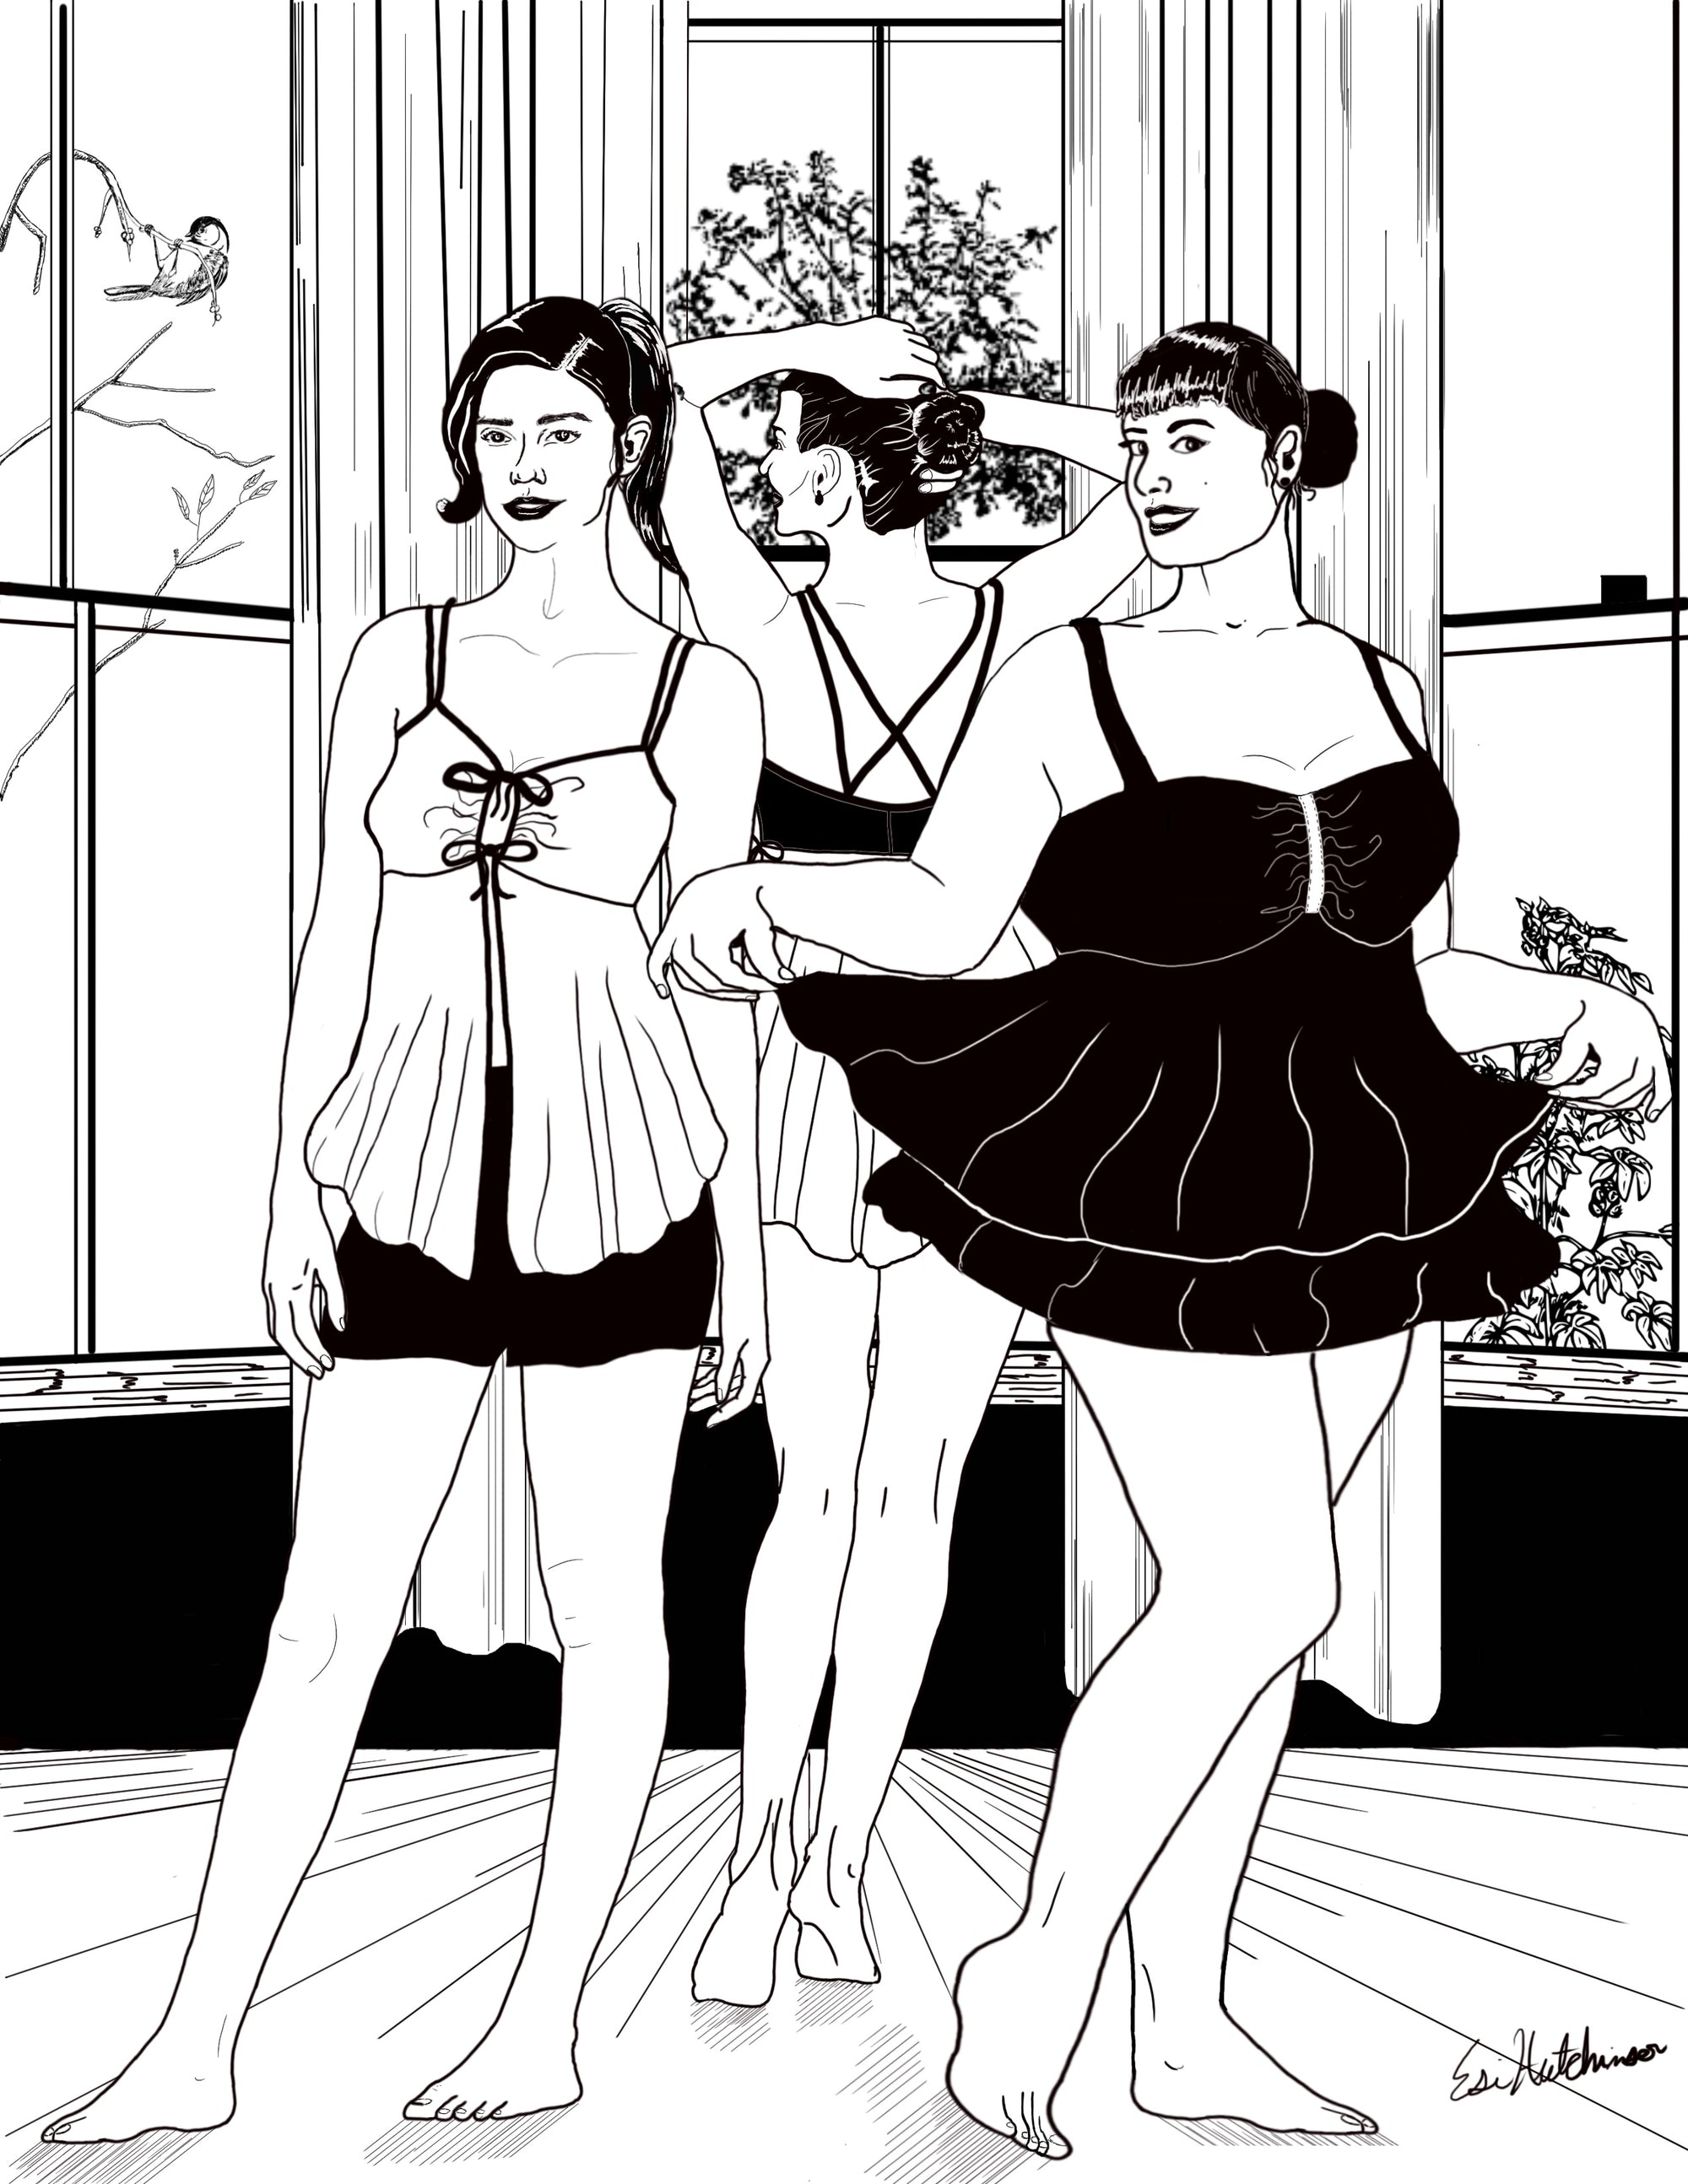 pen and ink drawing of three women wearing lingerie tops.  One with a double skirt, one with open front, and one with back to us and cross back straps.